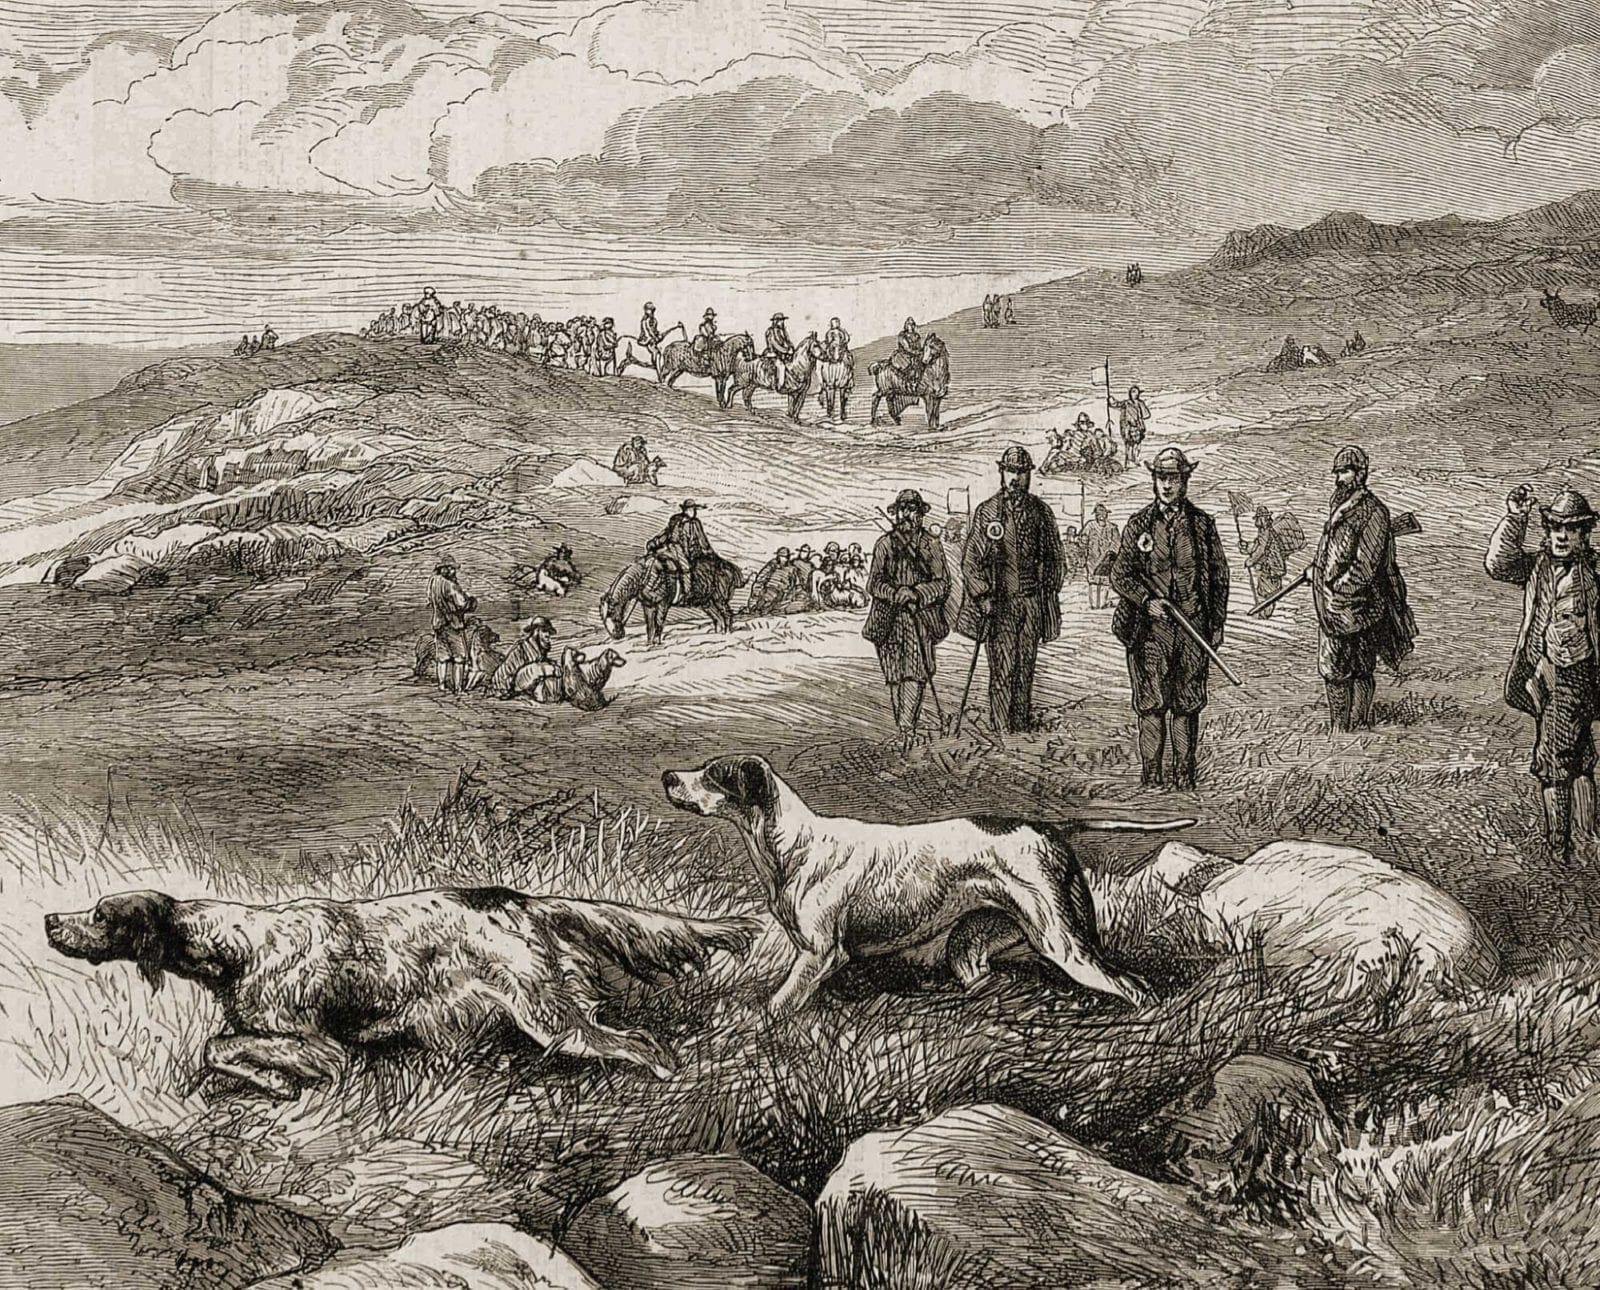 A historic drawing of the early pointing dogs in action while hunting.